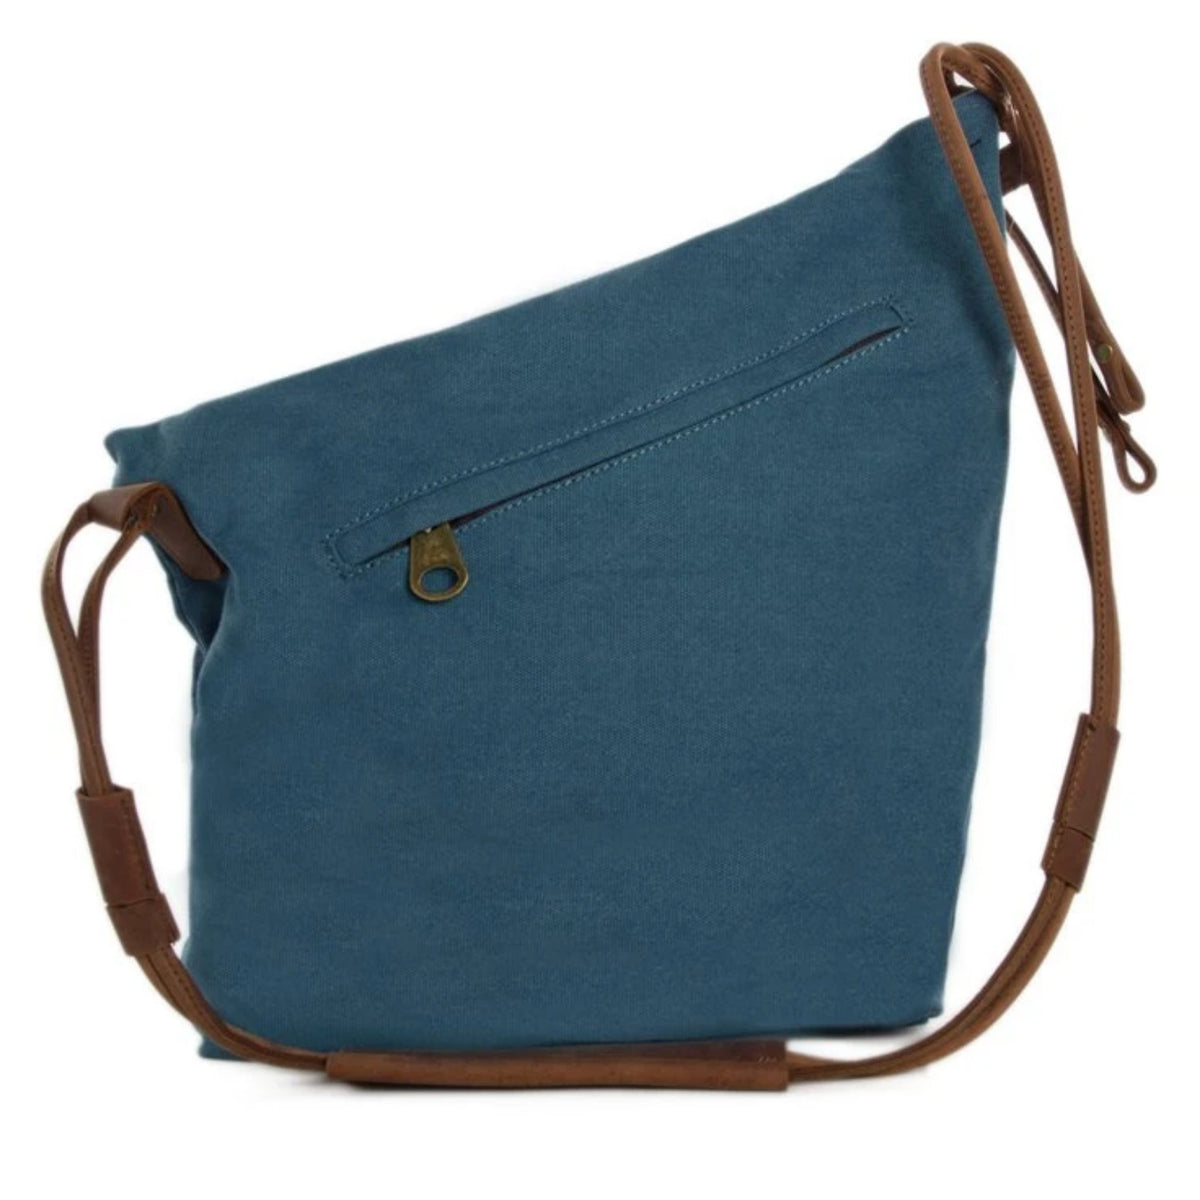 Waxed Canvas with Leather Strap Sling Bag - Blue | Blue Sebe Handmade ...